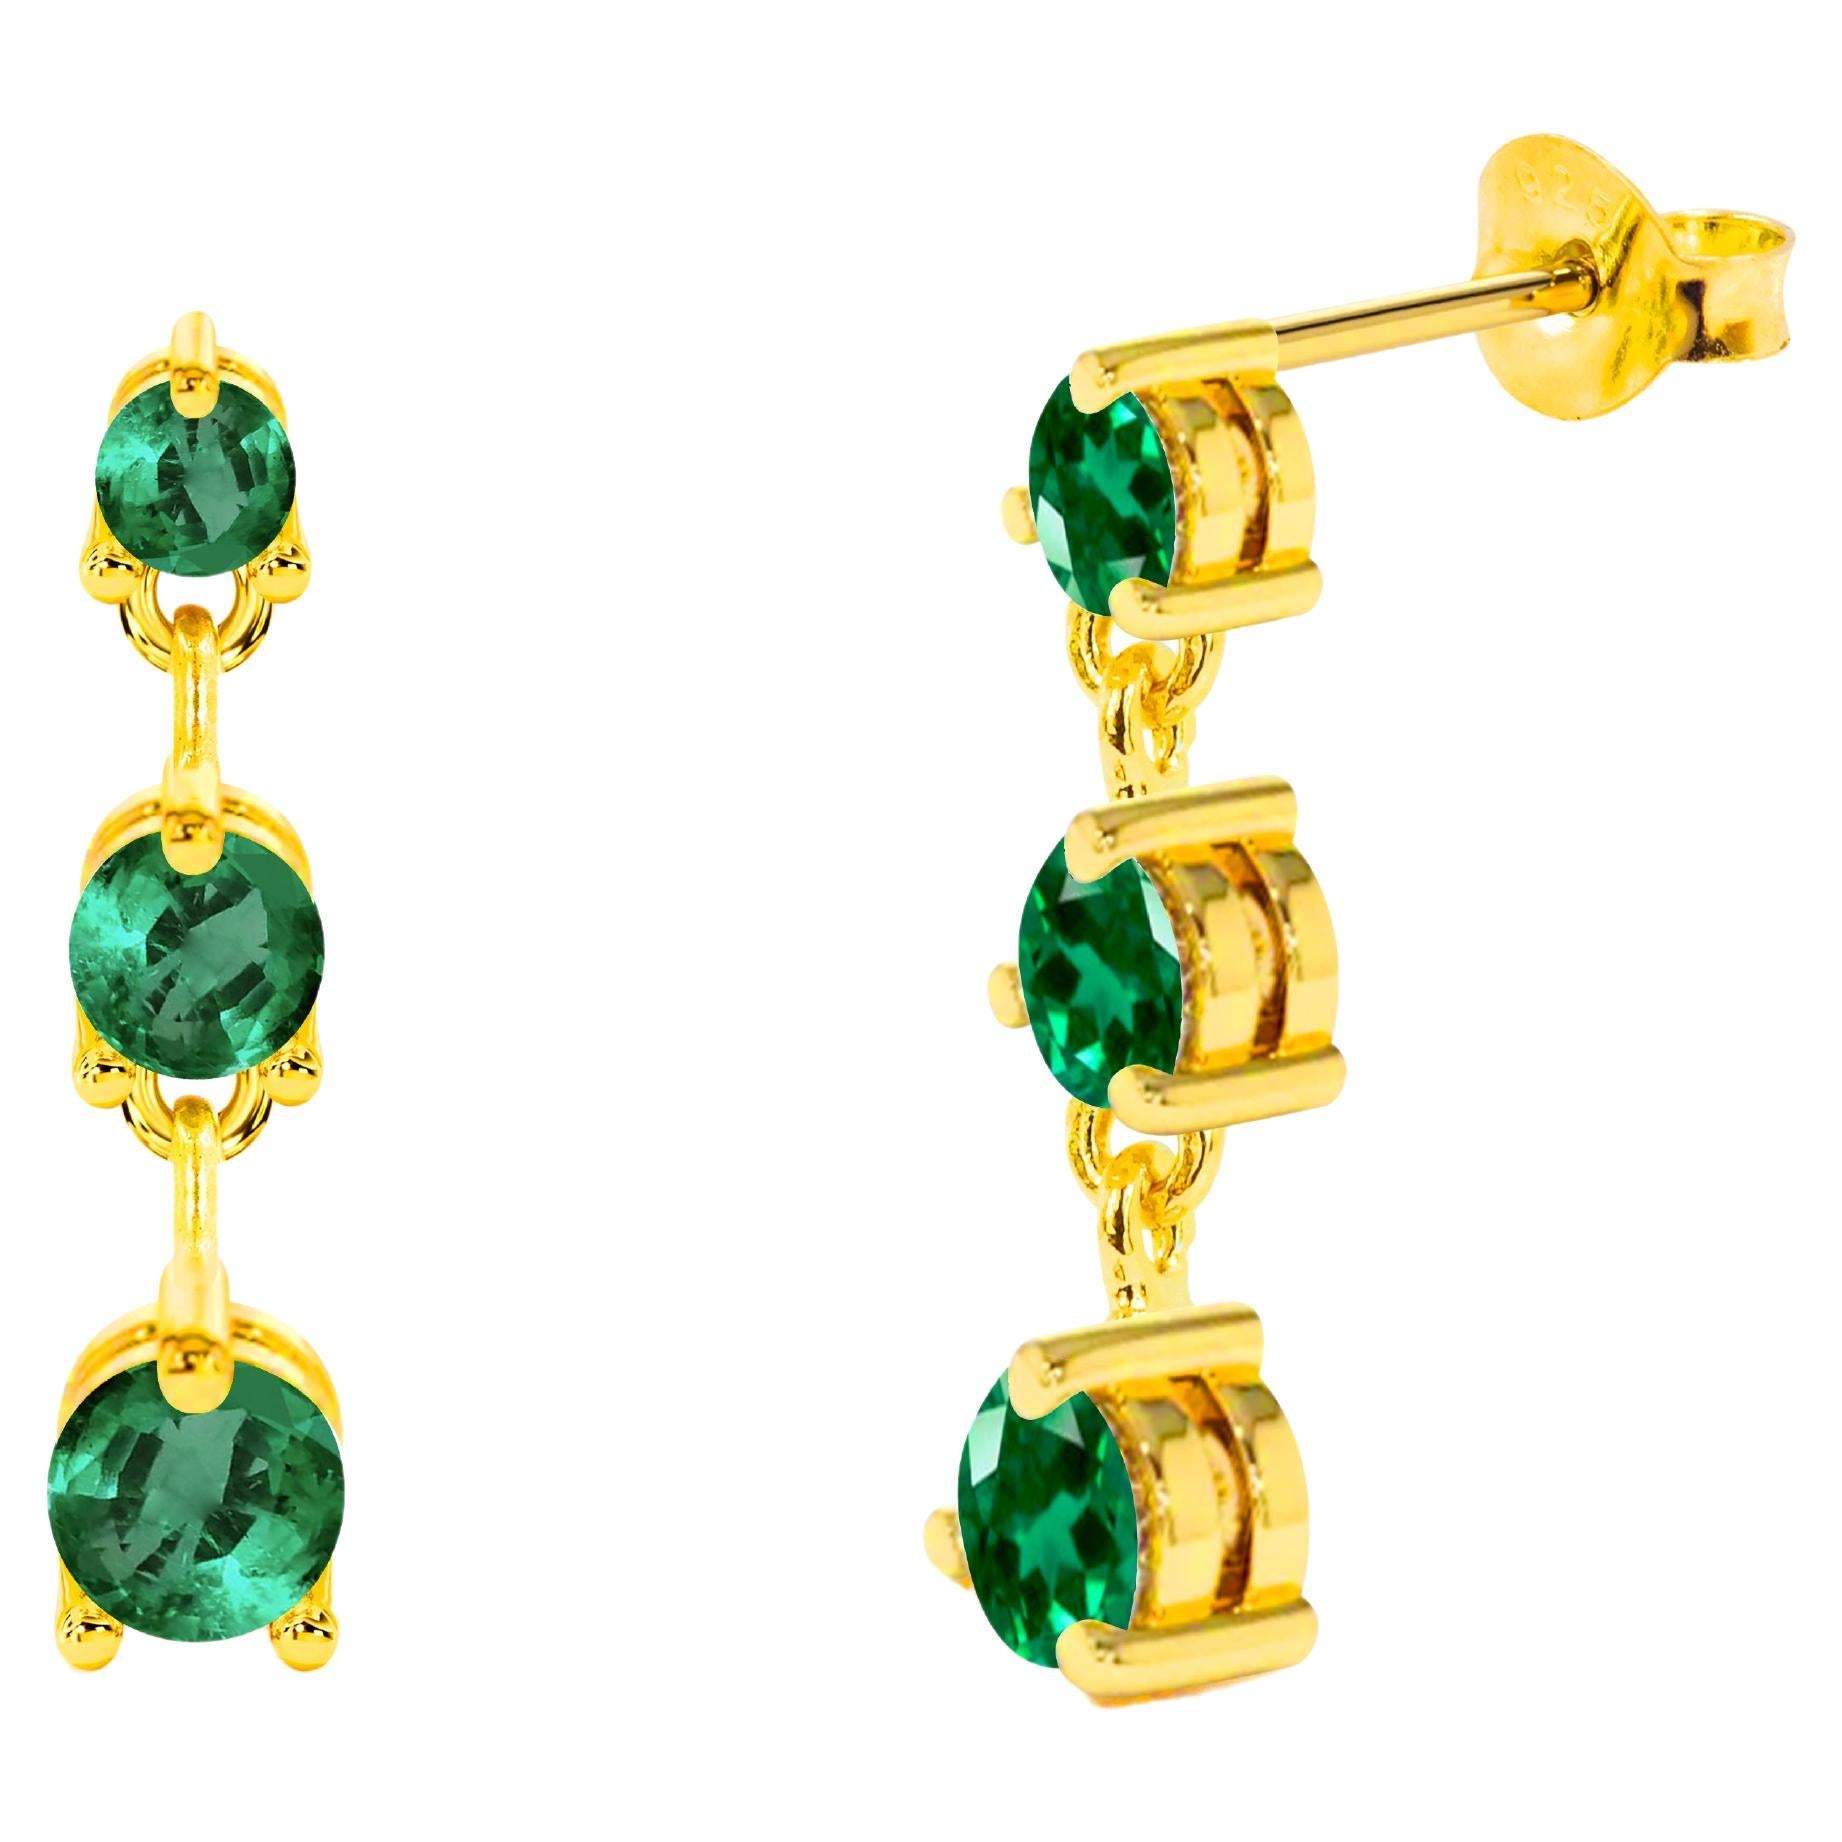 0.45ct Emerald Studs Earrings in 14k Gold For Sale